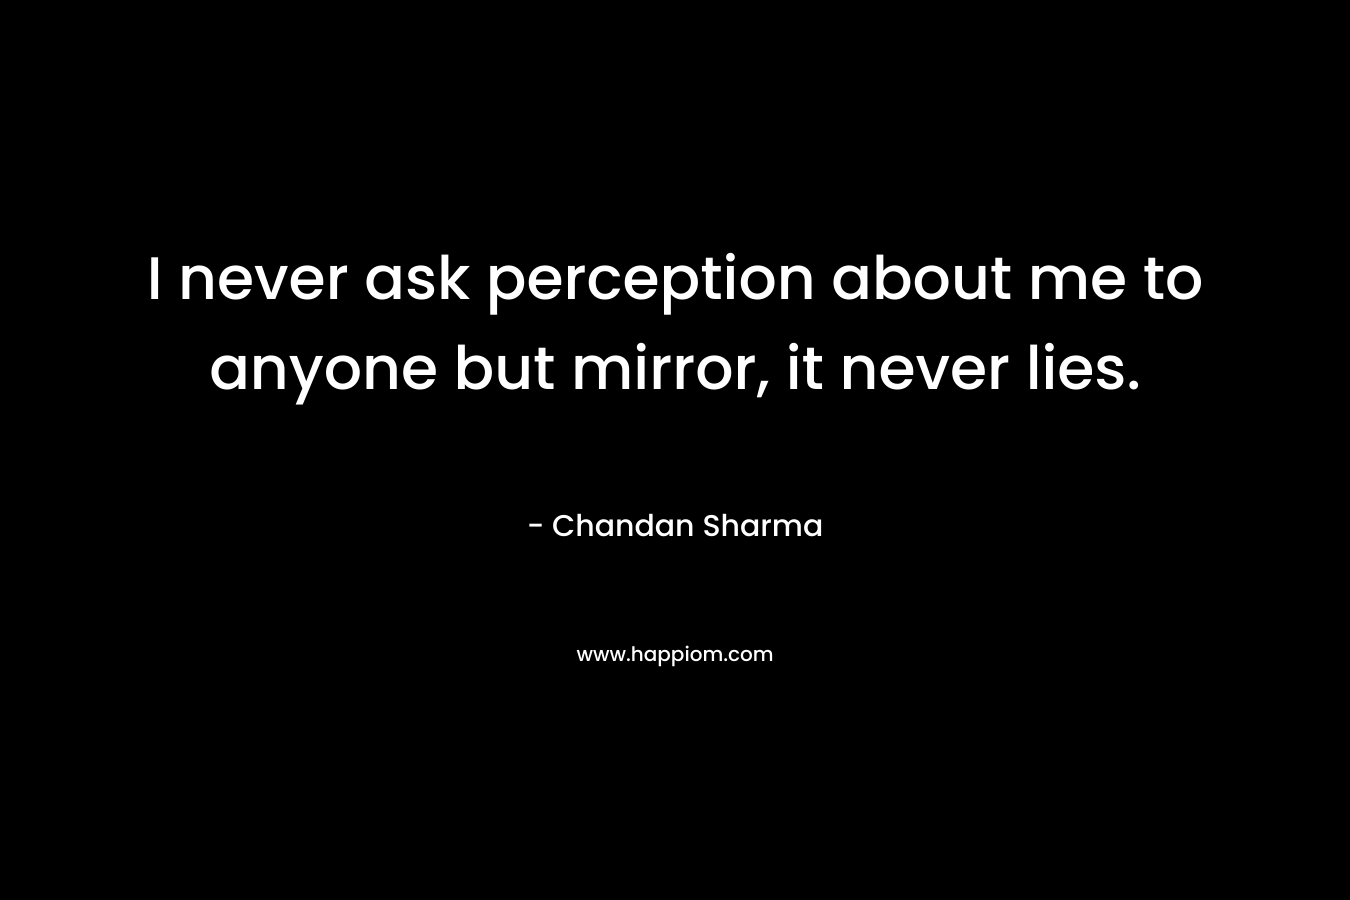 I never ask perception about me to anyone but mirror, it never lies.